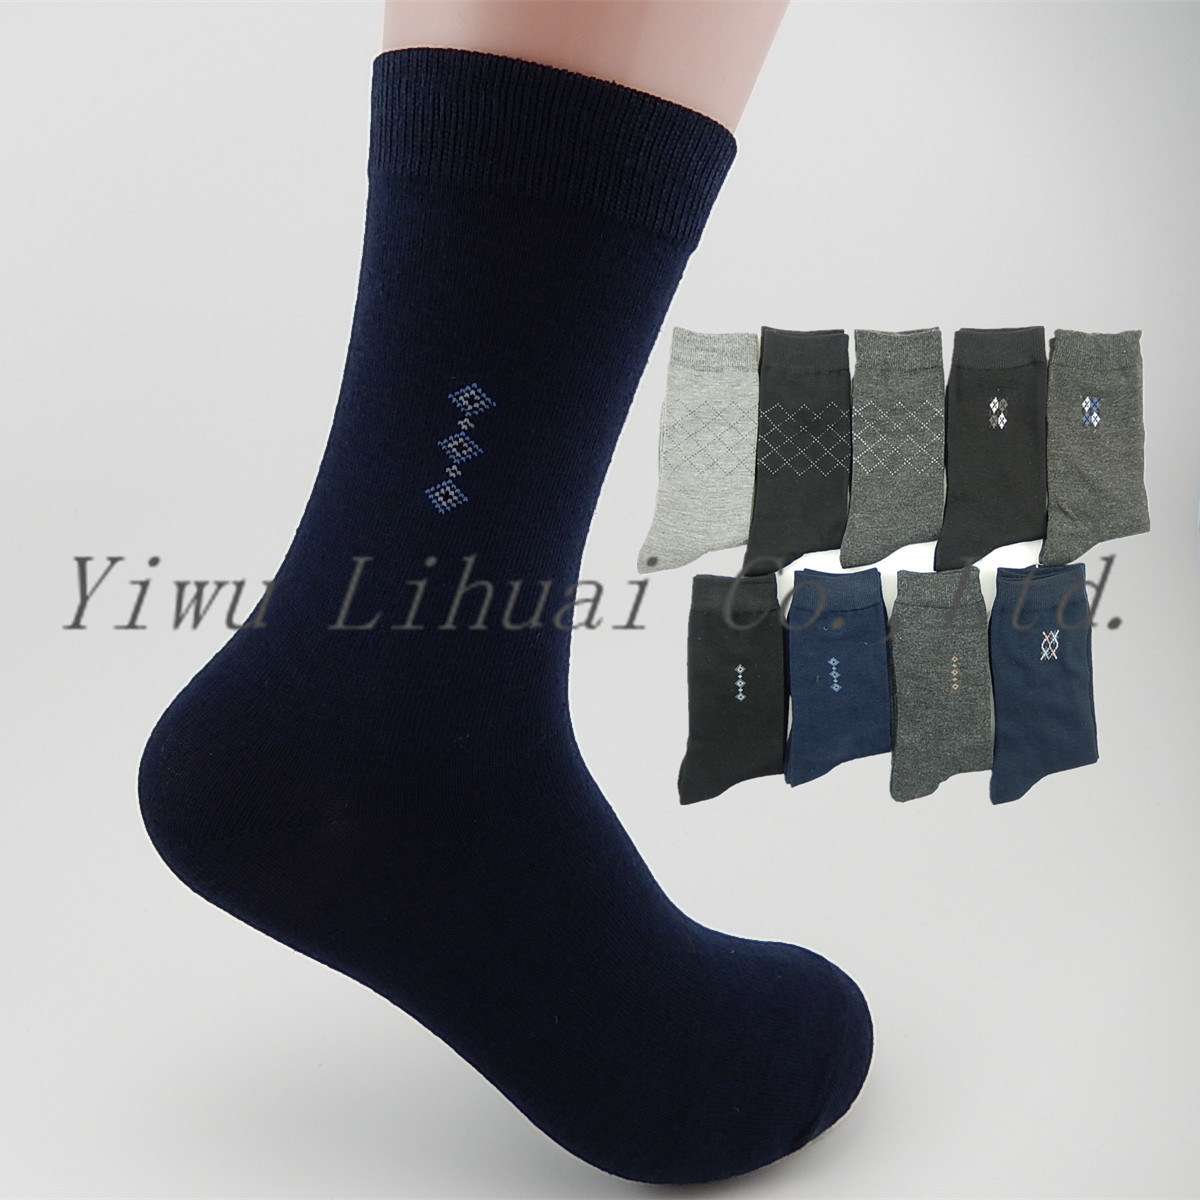 2018 Hot Selling Men's Adults' Business Crew Middle Socks